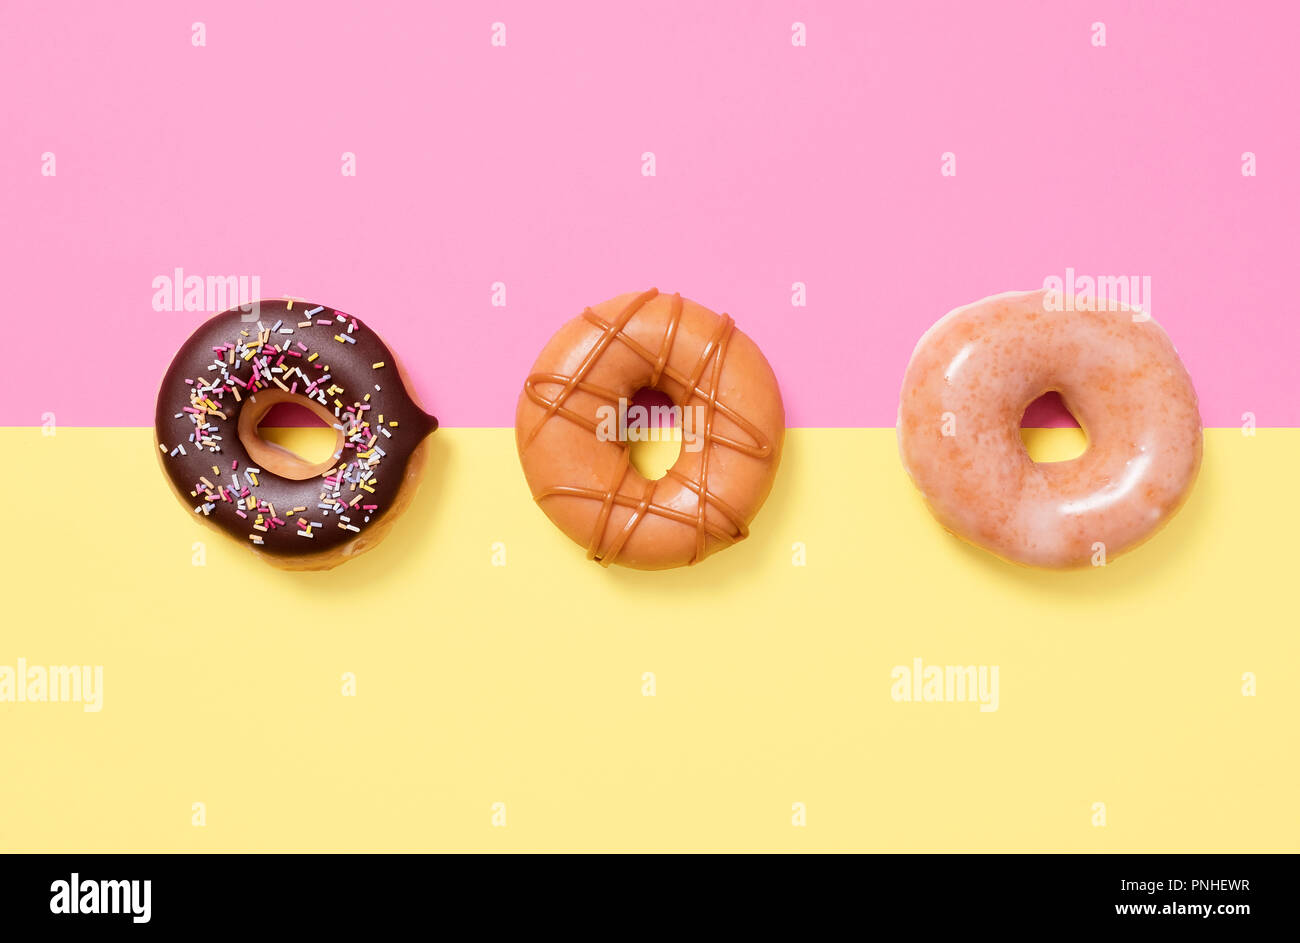 Three donuts in a row on a yellow and pink split background with chocolate sprinkles, plain, and swirled caramel Stock Photo